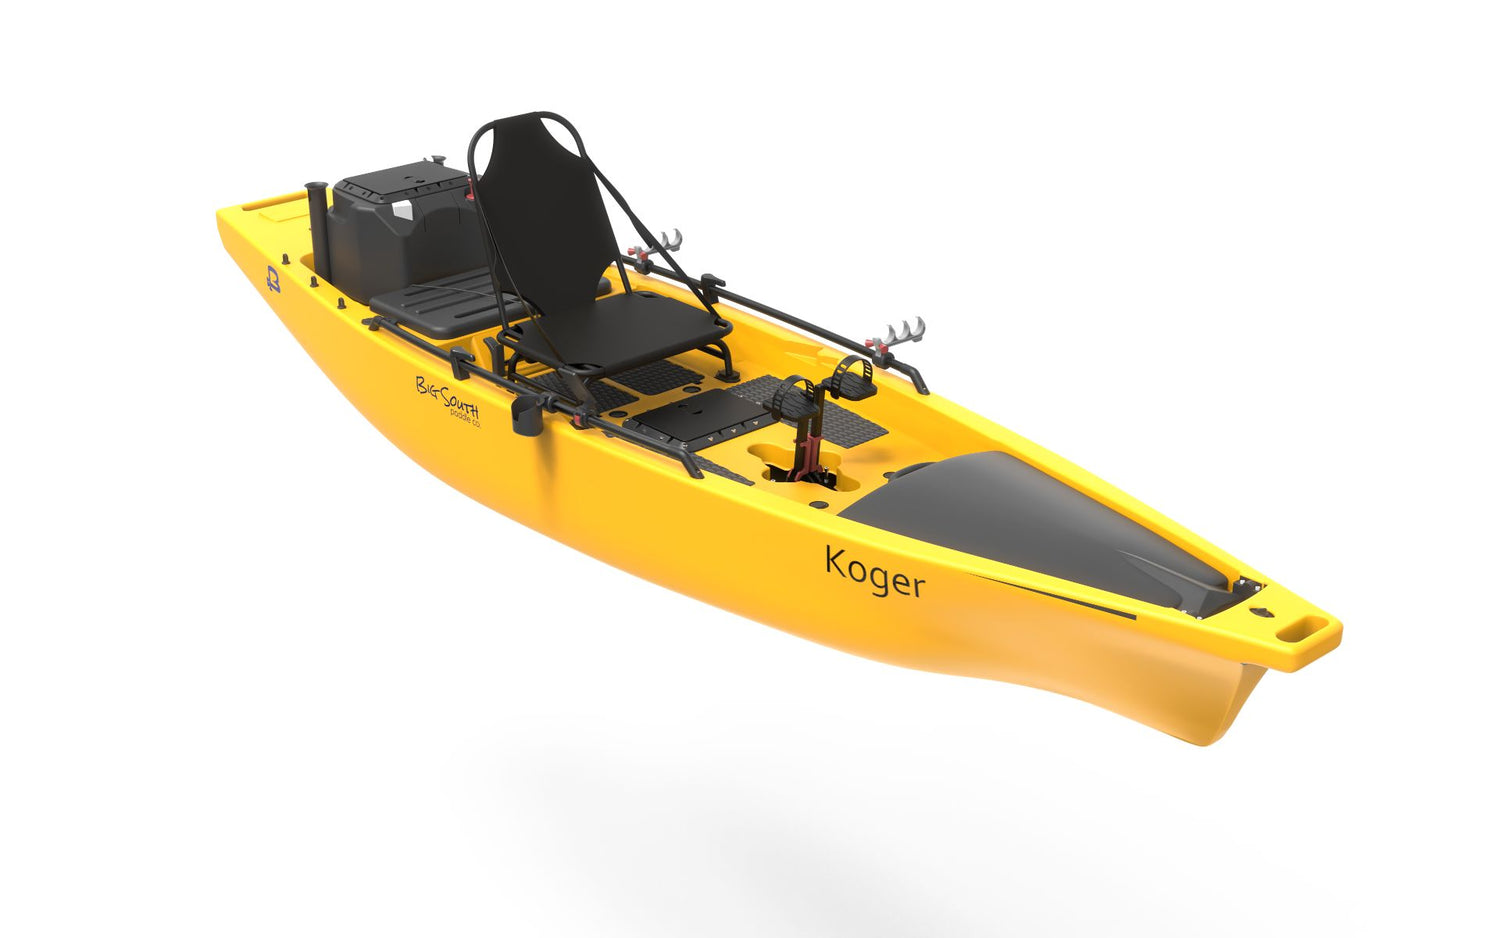 Koger 14 Foot Peddle Fishing Kayak with Live Well, 360 Degree Seat, and Accessories. Bow right view